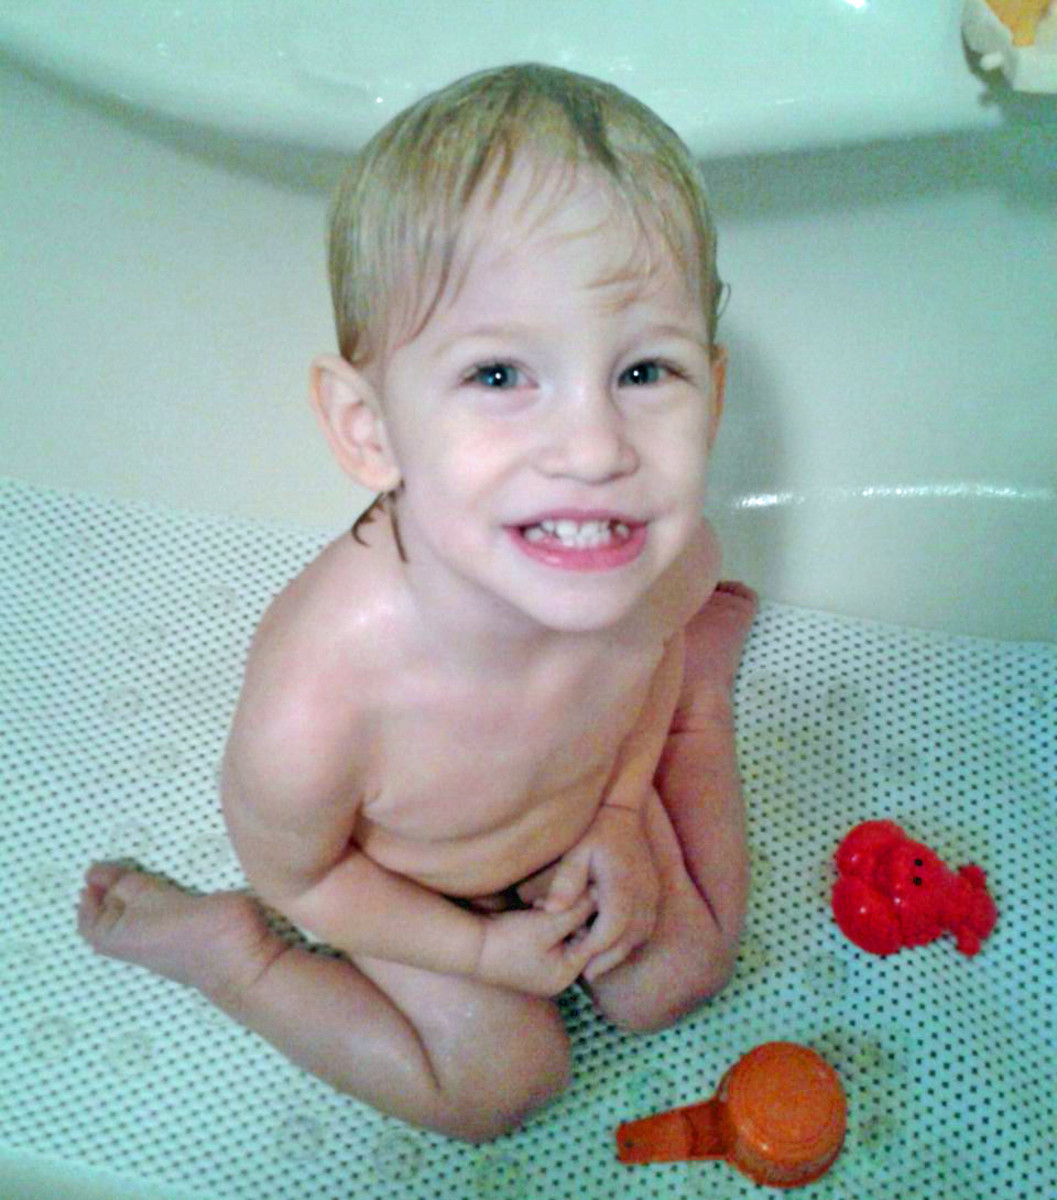 My toddler after his rash-eliminating bathtub soak. See, much happier! (Ignore the forced smile. I promise. He's happy.)